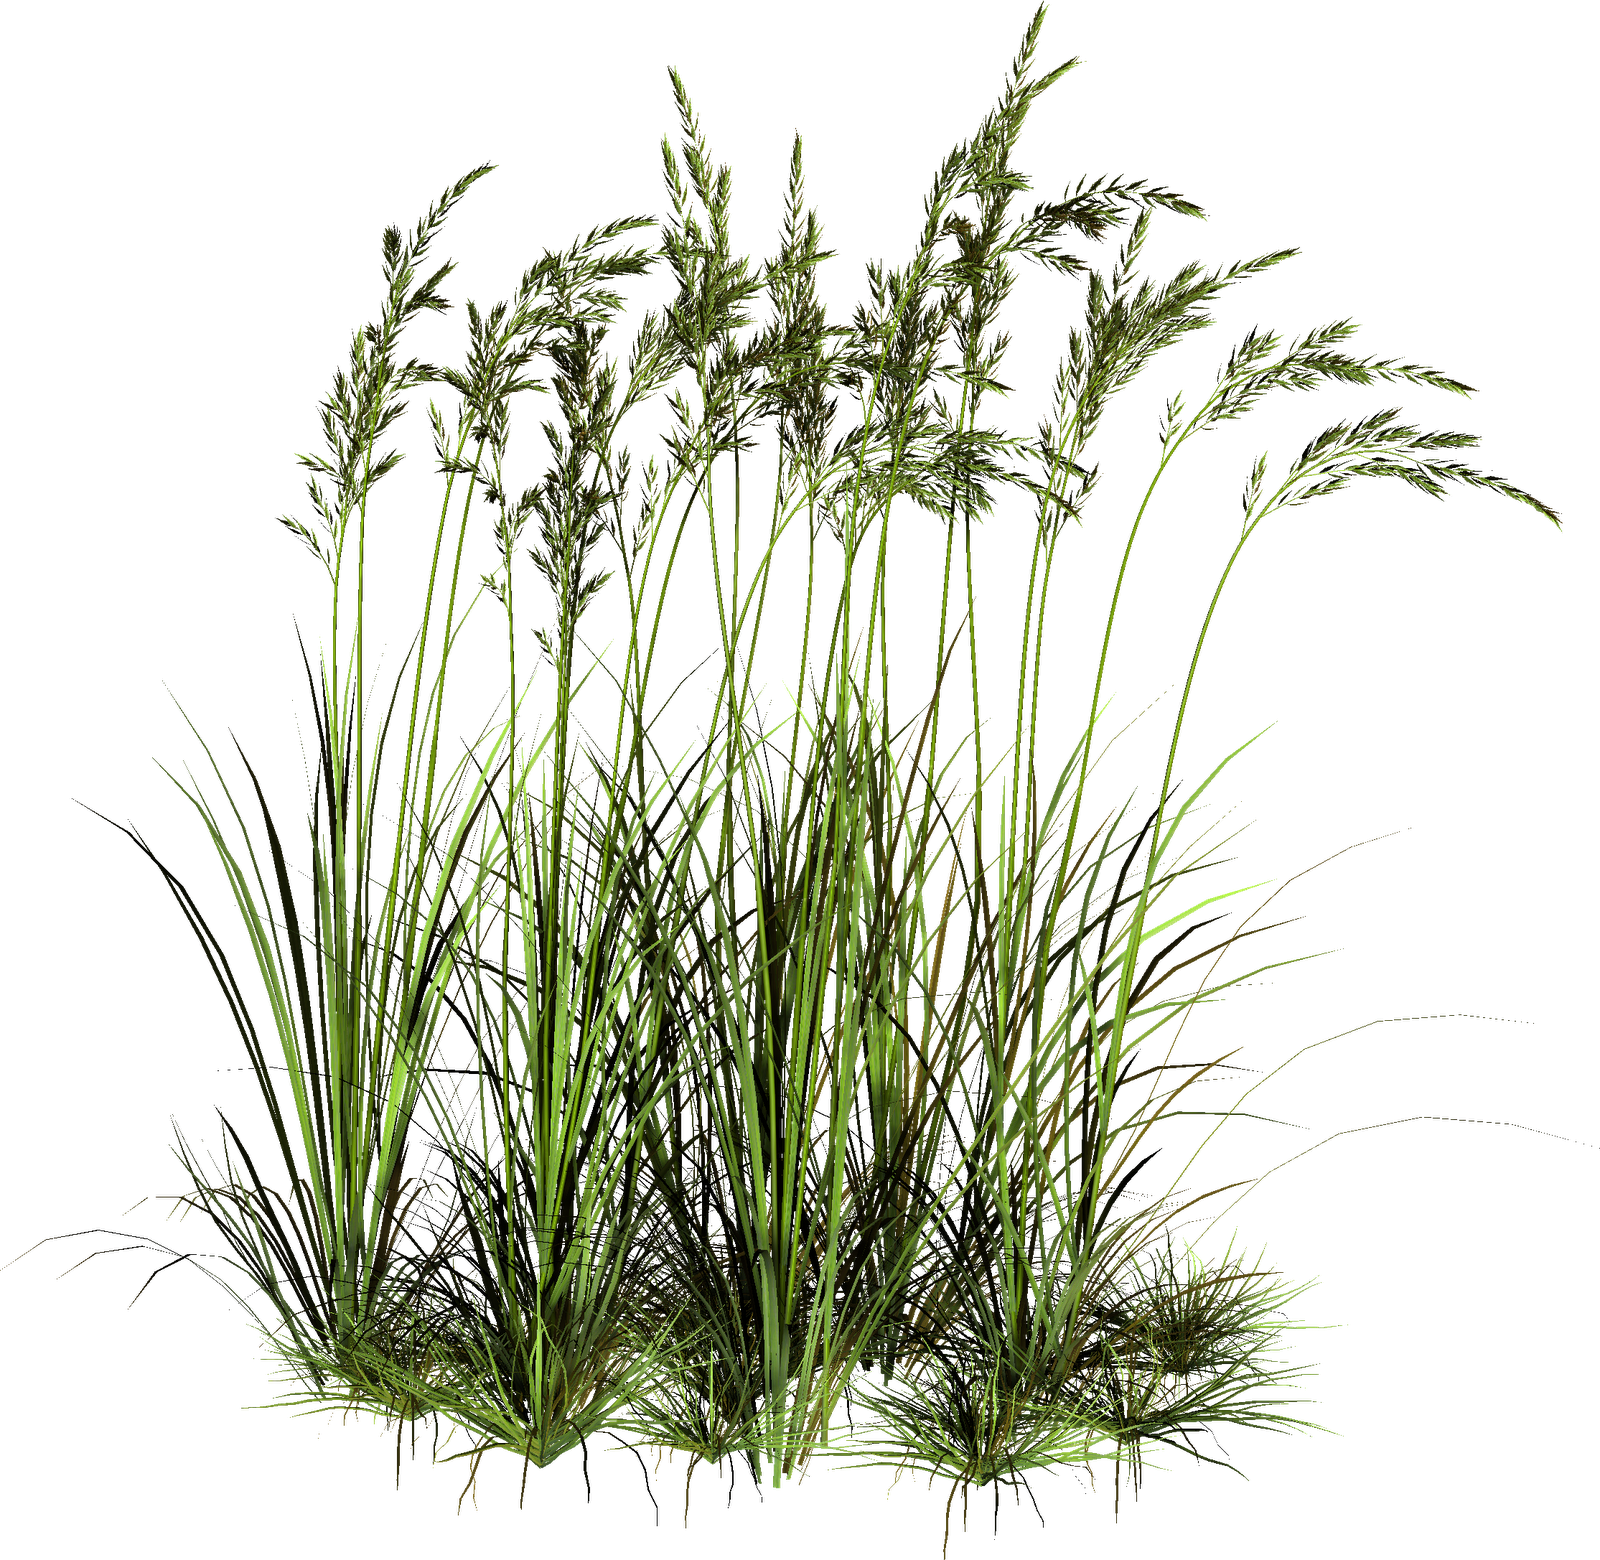 A Green Grass With Long Stems